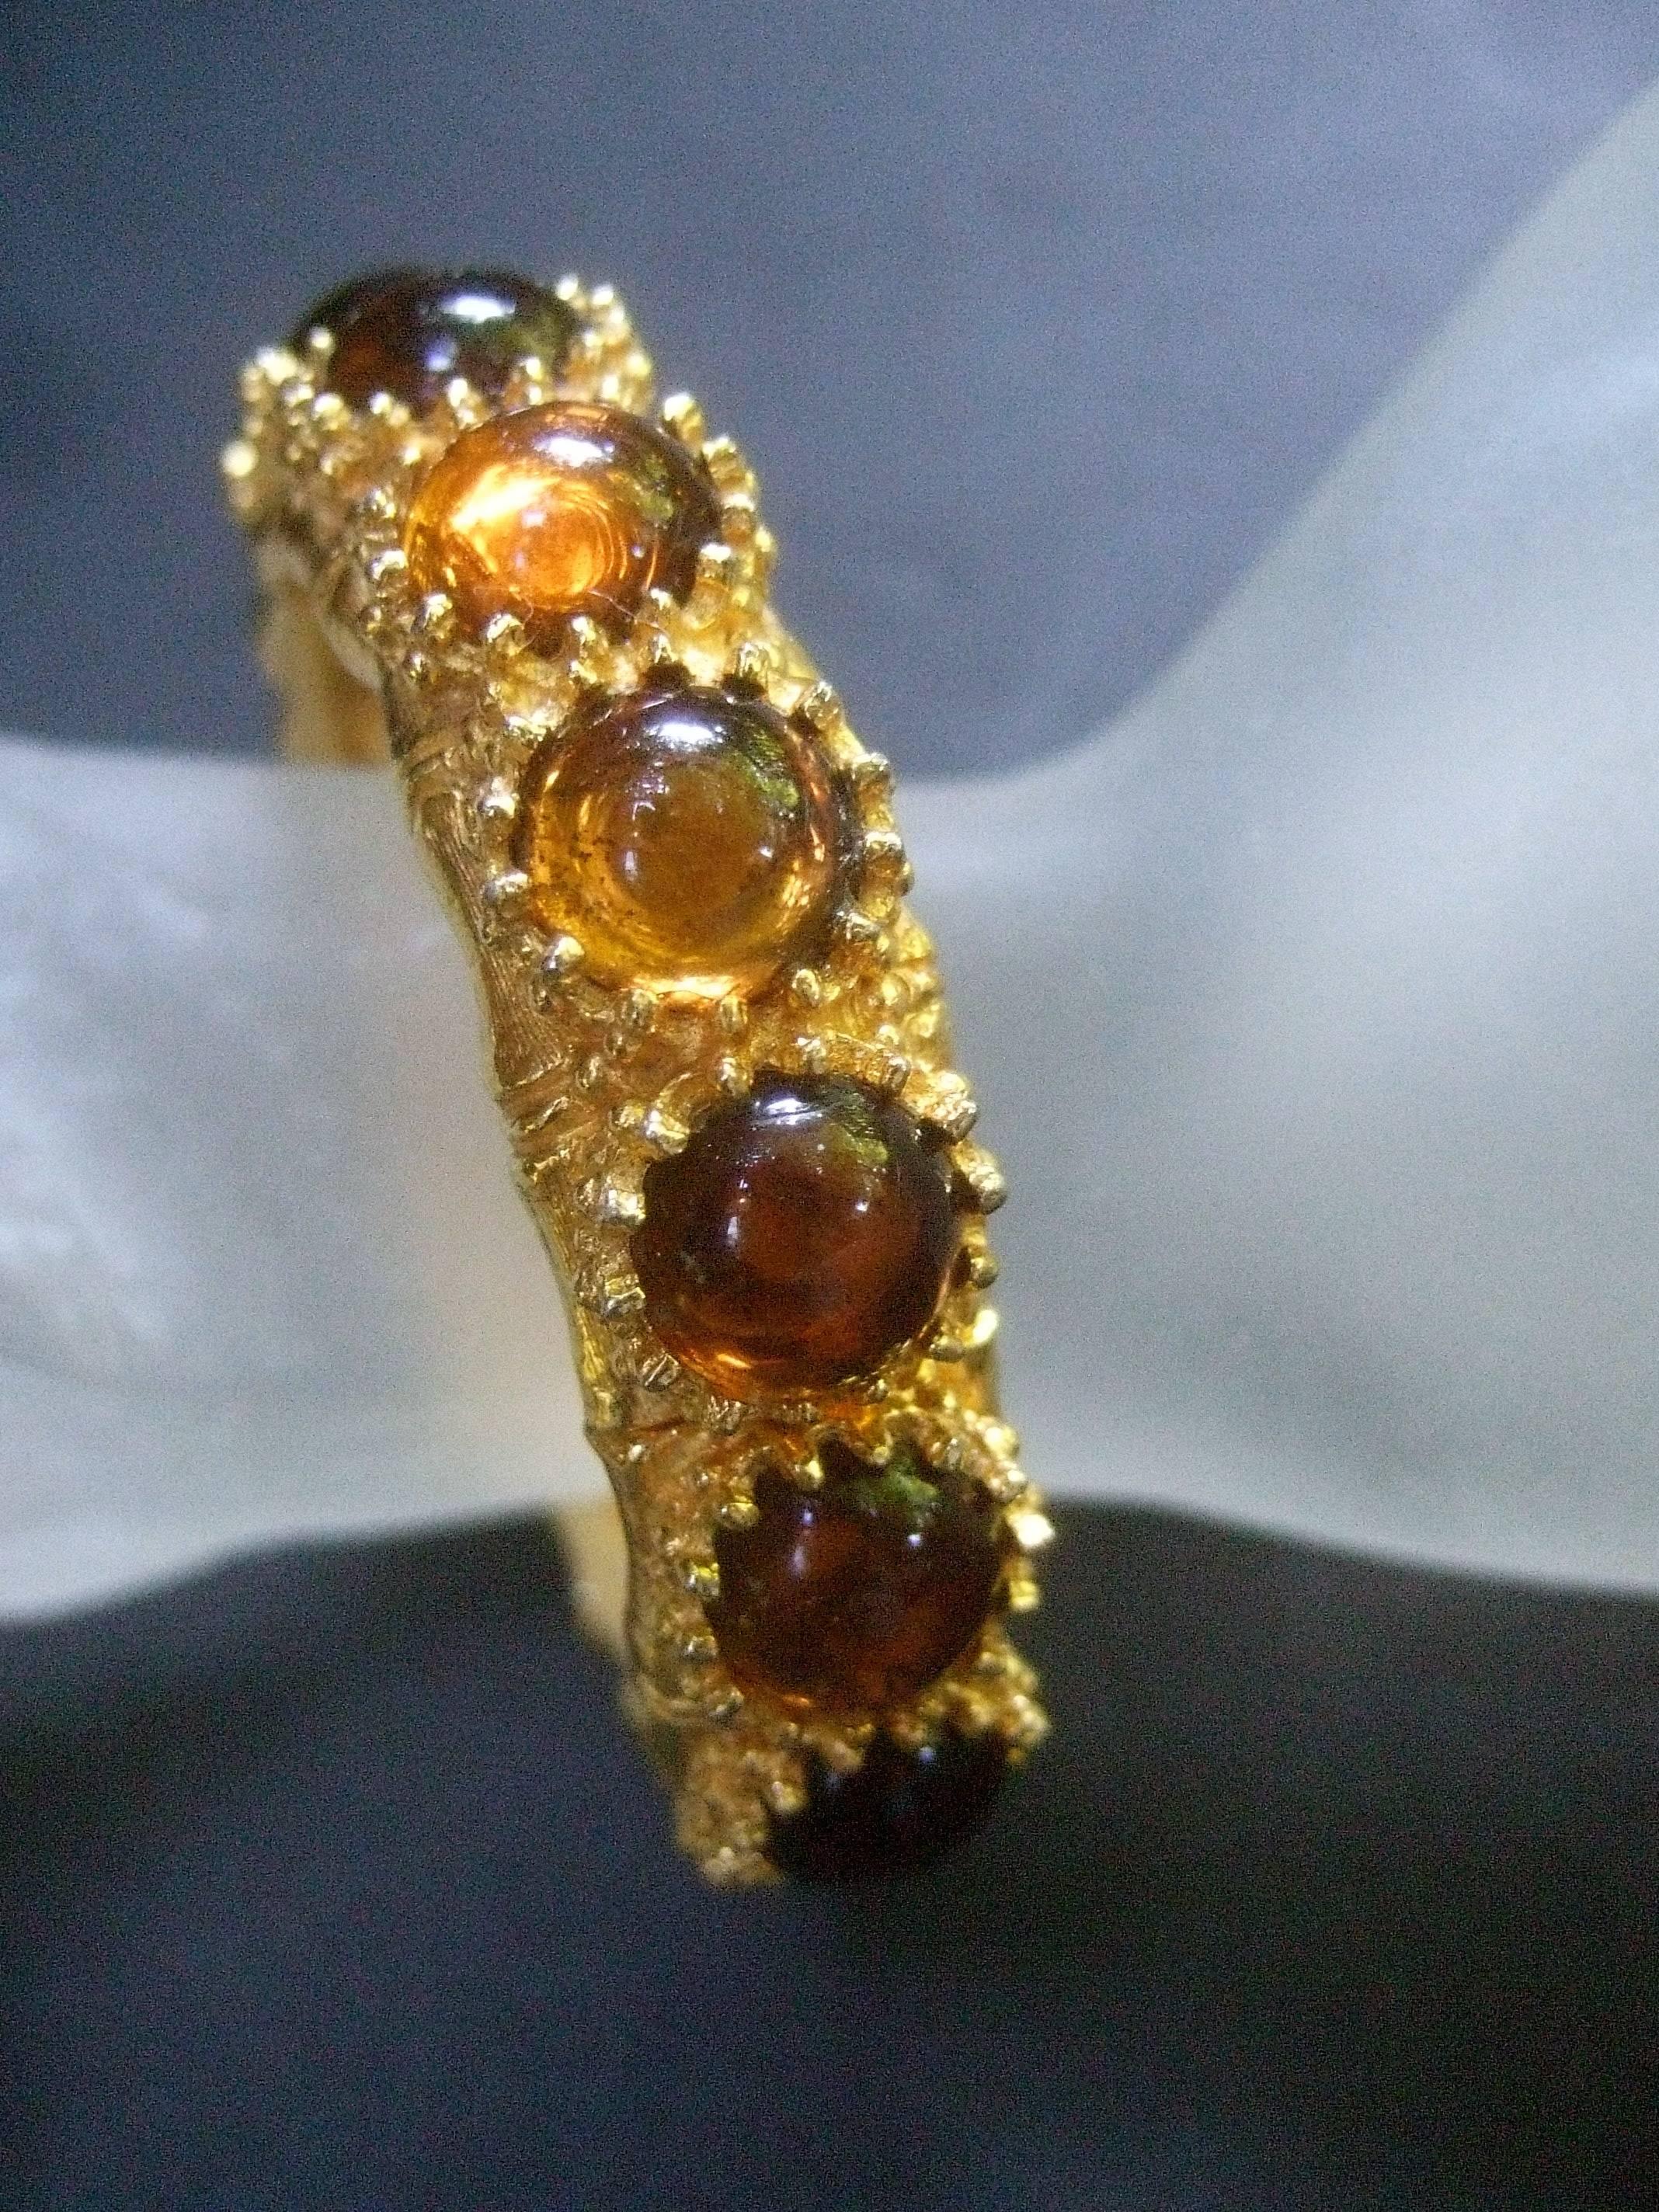 Ken Lane amber glass cabochon gilt metal bracelet c 1970s
The stylish designer costume clamper bracelet is adorned
with a series of honey color glass cabochons 

The hinged bangle is plated with gilt metal 
that has a bamboo design framing the